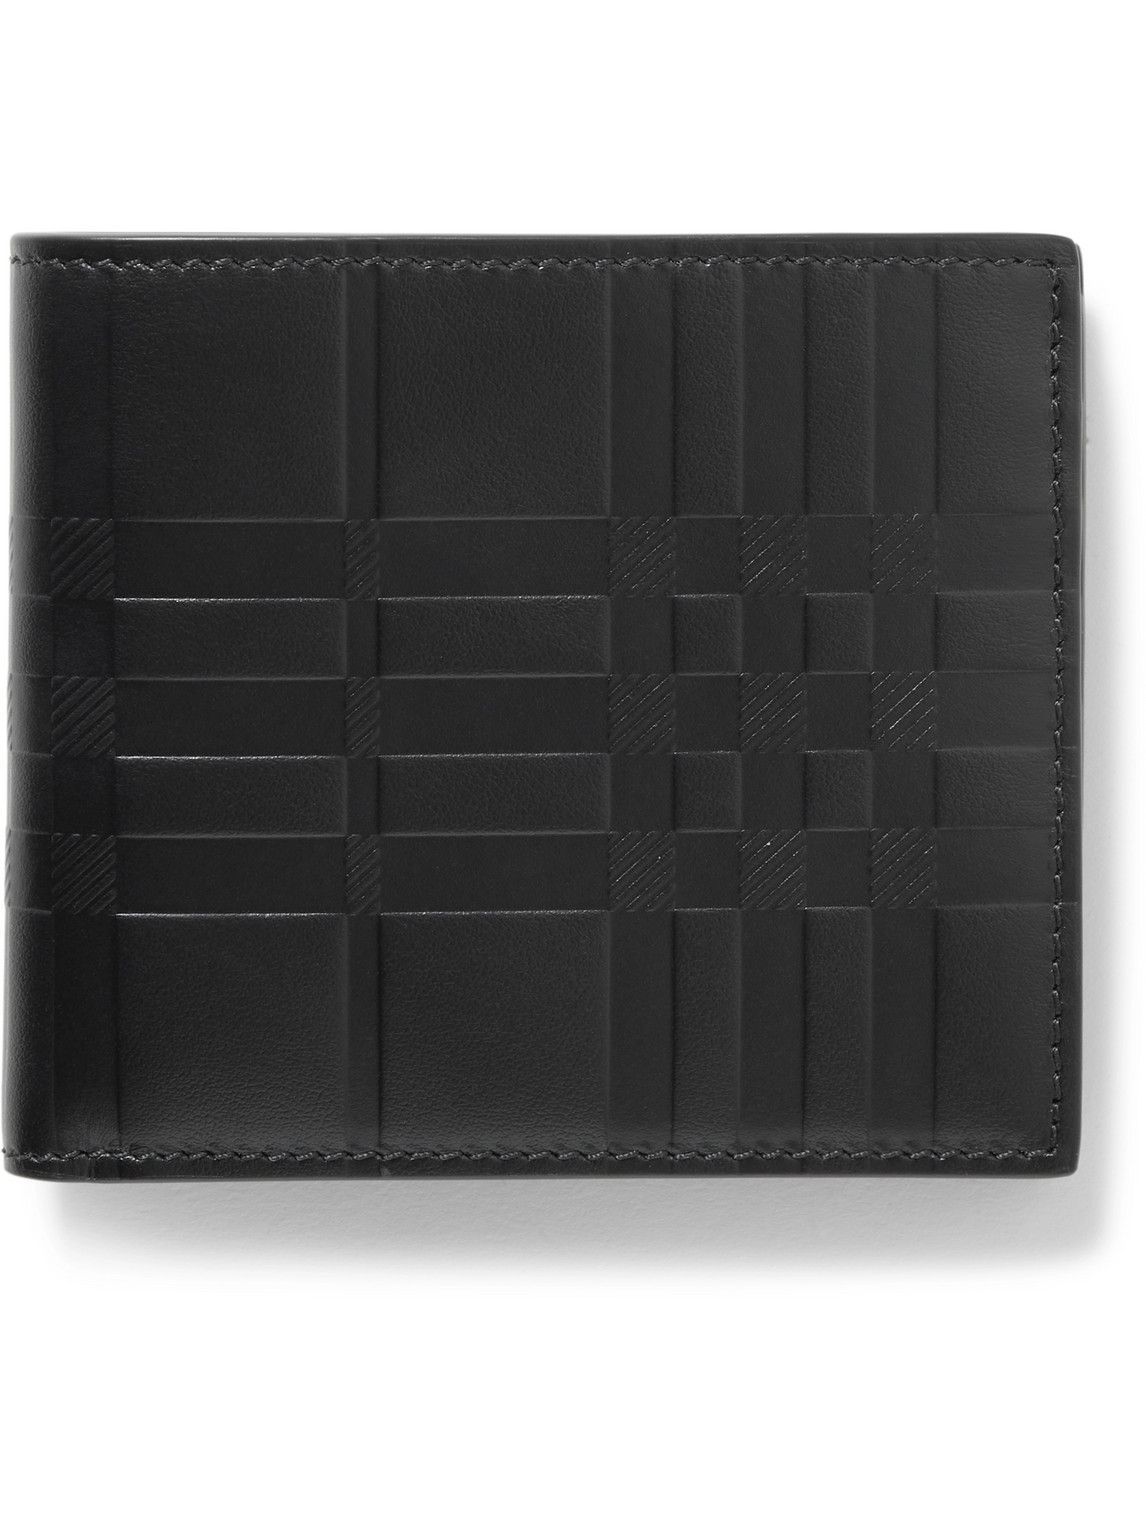 Photo: Burberry - Embossed Leather Billfold Wallet